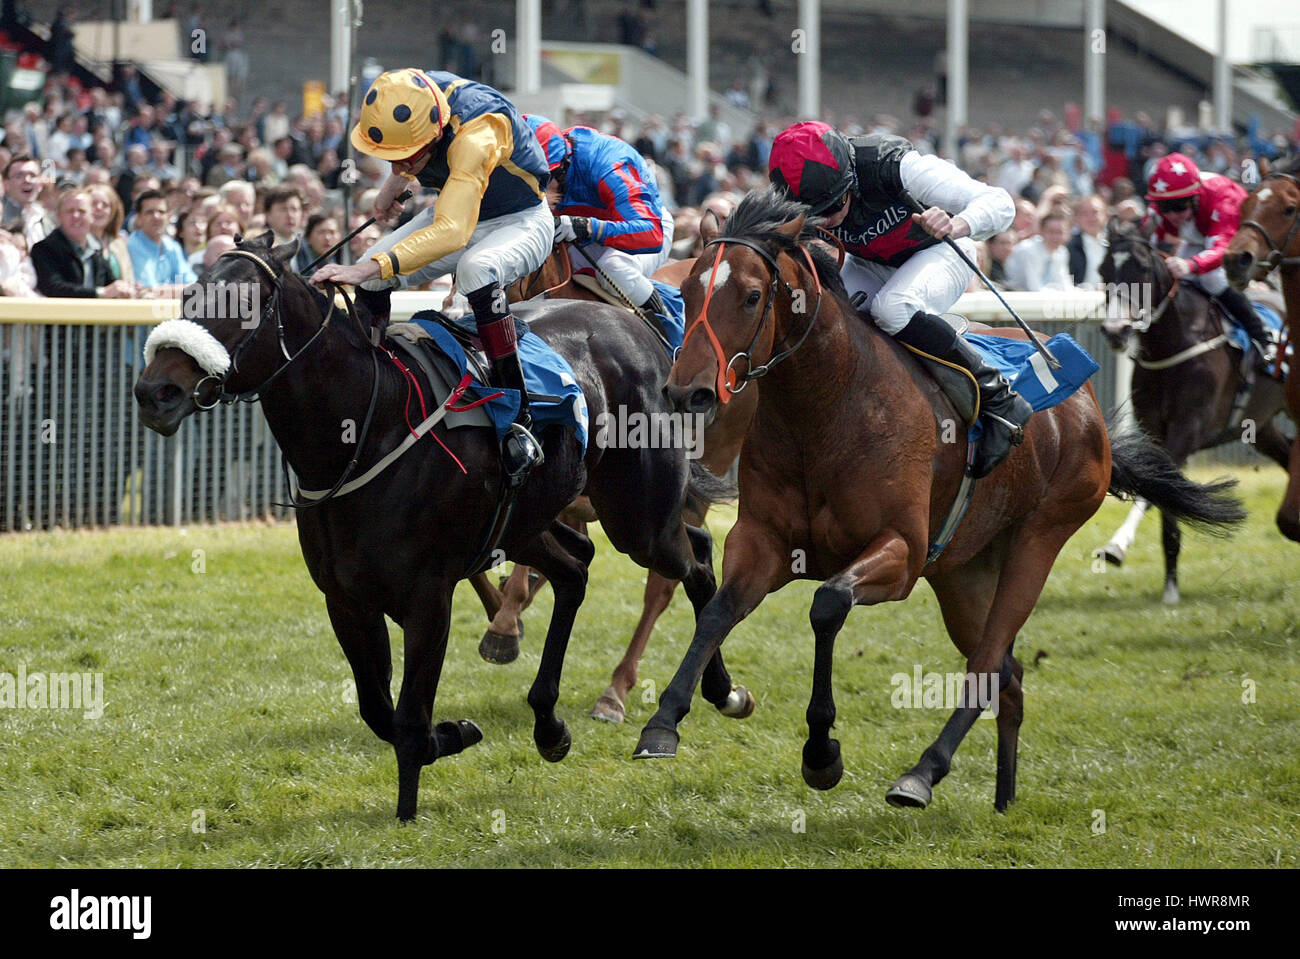 BOW BRIDGE & GAMBLE IN GOLD RIDDEN BY D.GIBSON & R.L.MOORE YORK RACECOURSE YORK ENGLAND 15 May 2005 Stock Photo